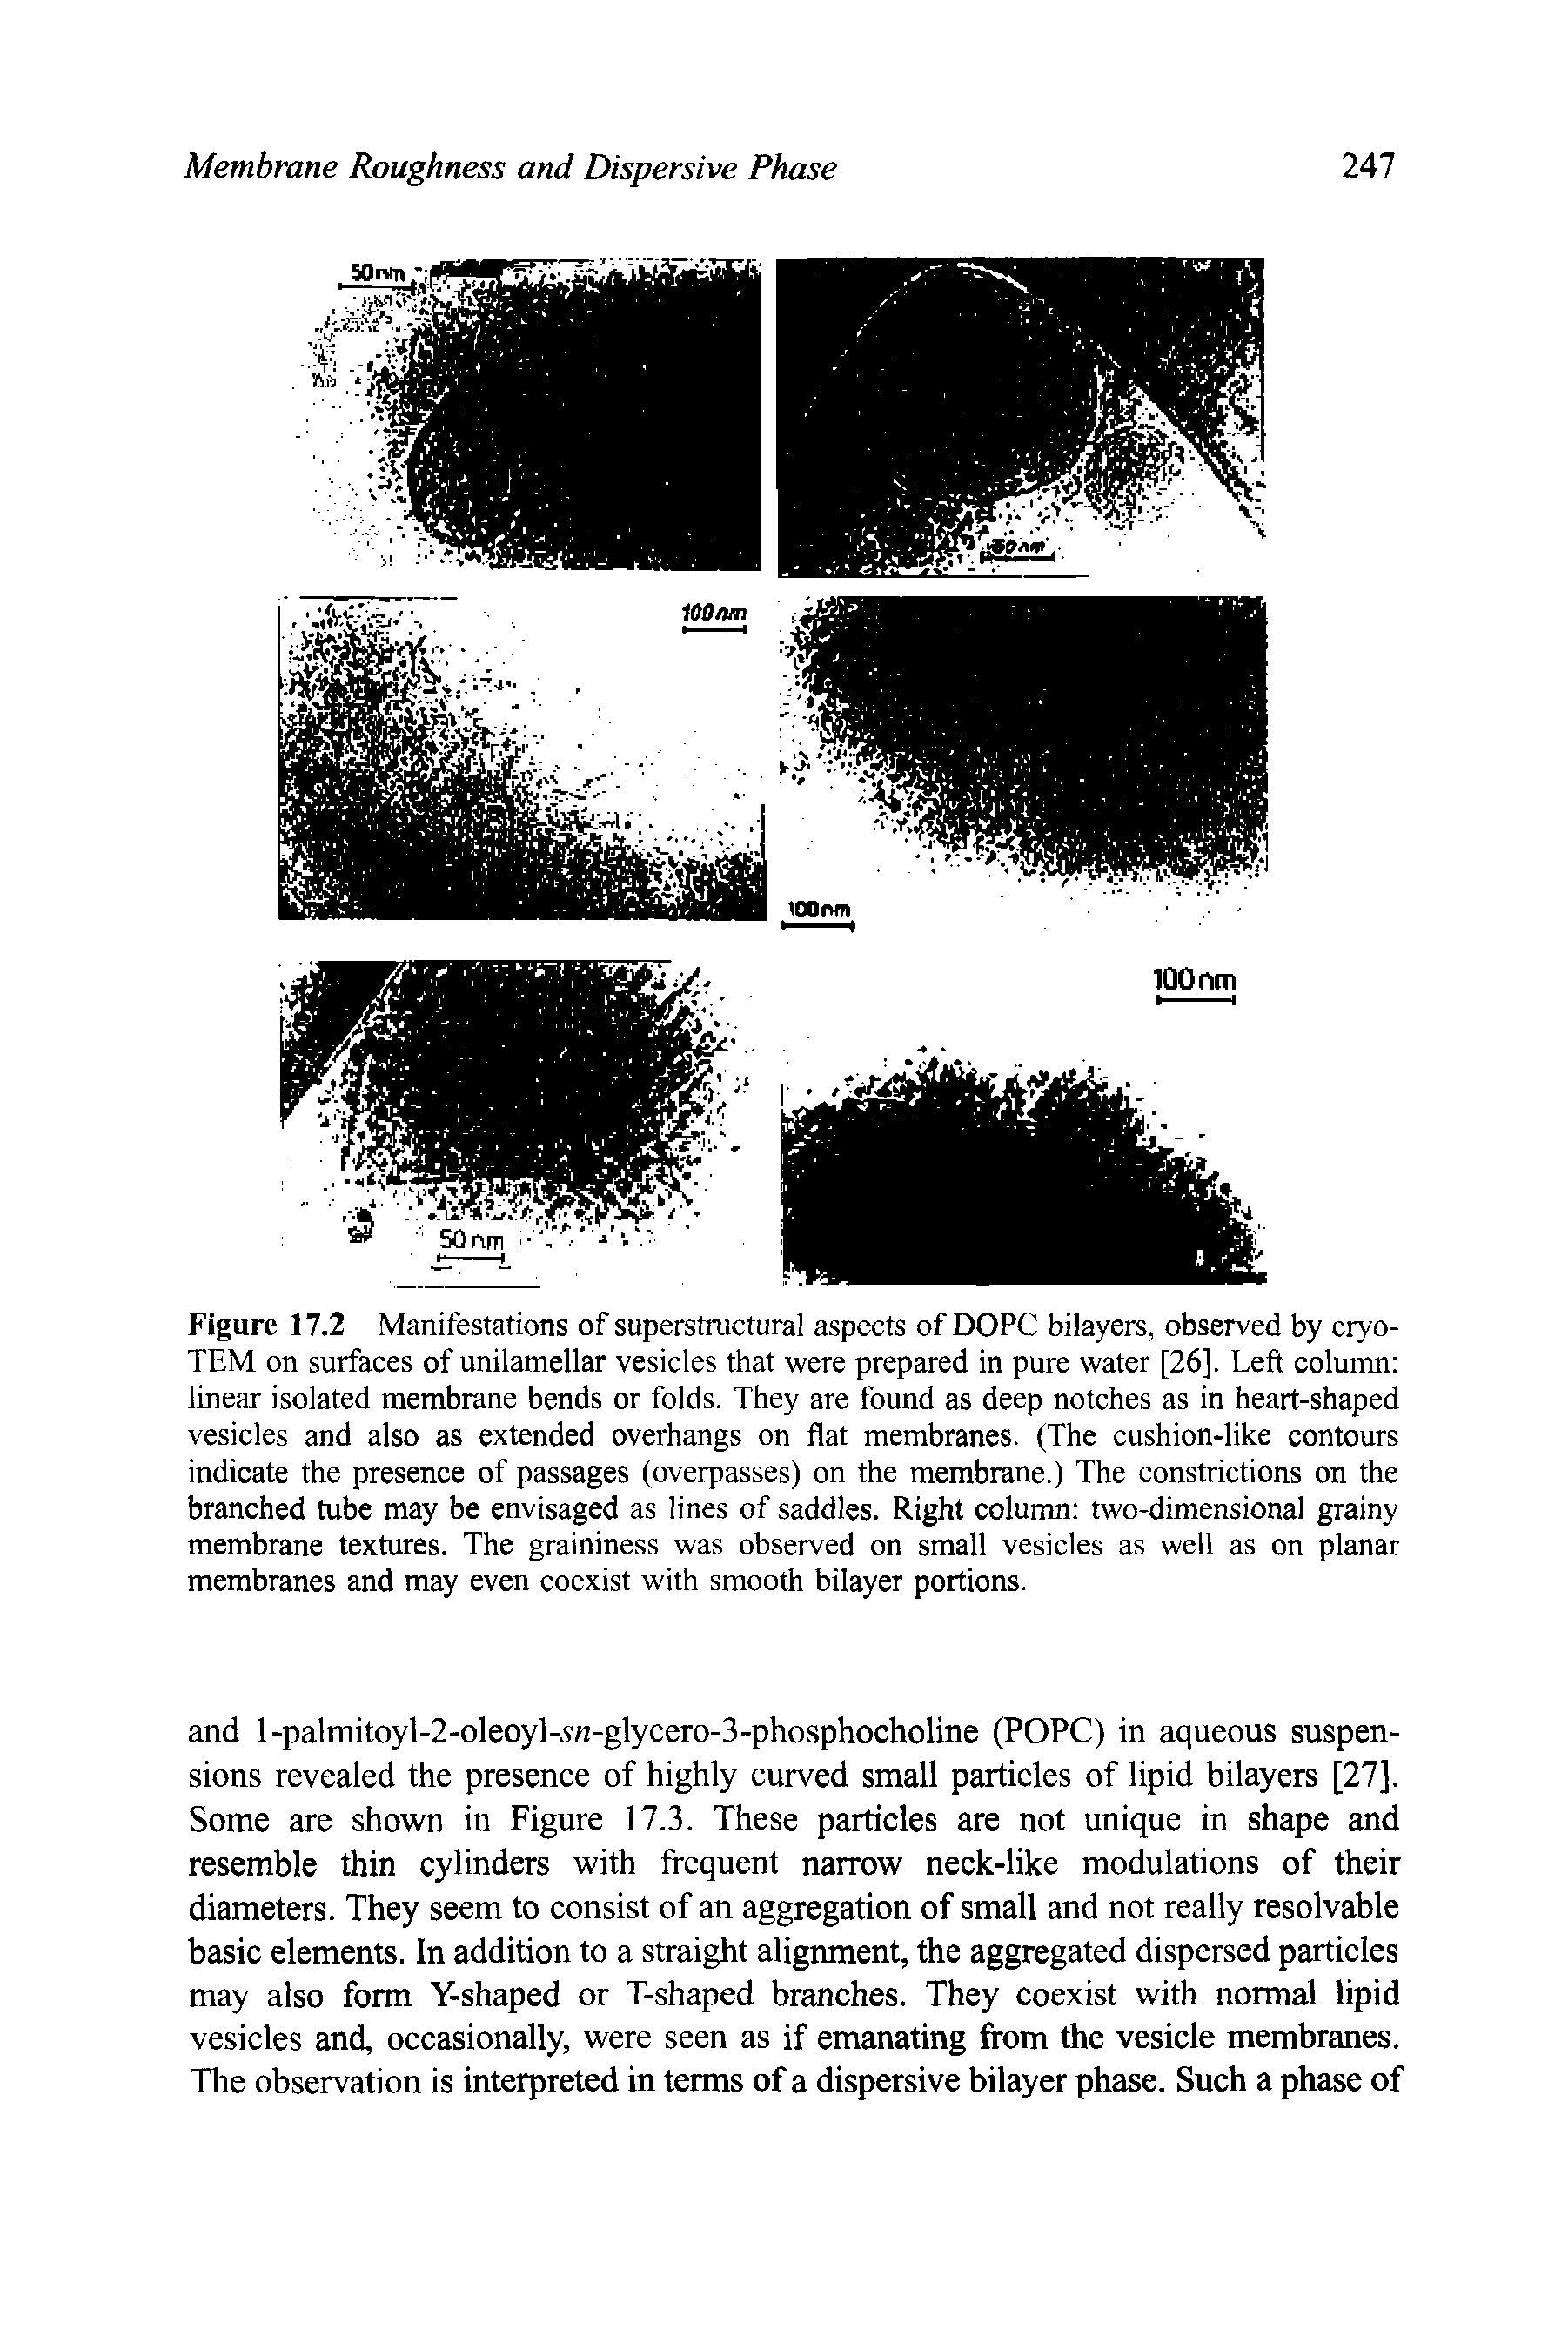 Figure 17.2 Manifestations of superstmctural aspects of DOPC bilayers, observed by cryo-TEM on surfaces of unilamellar vesicles that were prepared in pure water [26]. Left column linear isolated membrane bends or folds. They are found as deep notches as in heart-shaped vesicles and also as extended overhangs on flat membranes. (The cushion-like contours indicate the presence of passages (overpasses) on the membrane.) The constrictions on the branched tube may be envisaged as lines of saddles. Right column two-dimensional grainy membrane textures. The graininess was observed on small vesicles as well as on planar membranes and may even coexist with smooth bilayer portions.